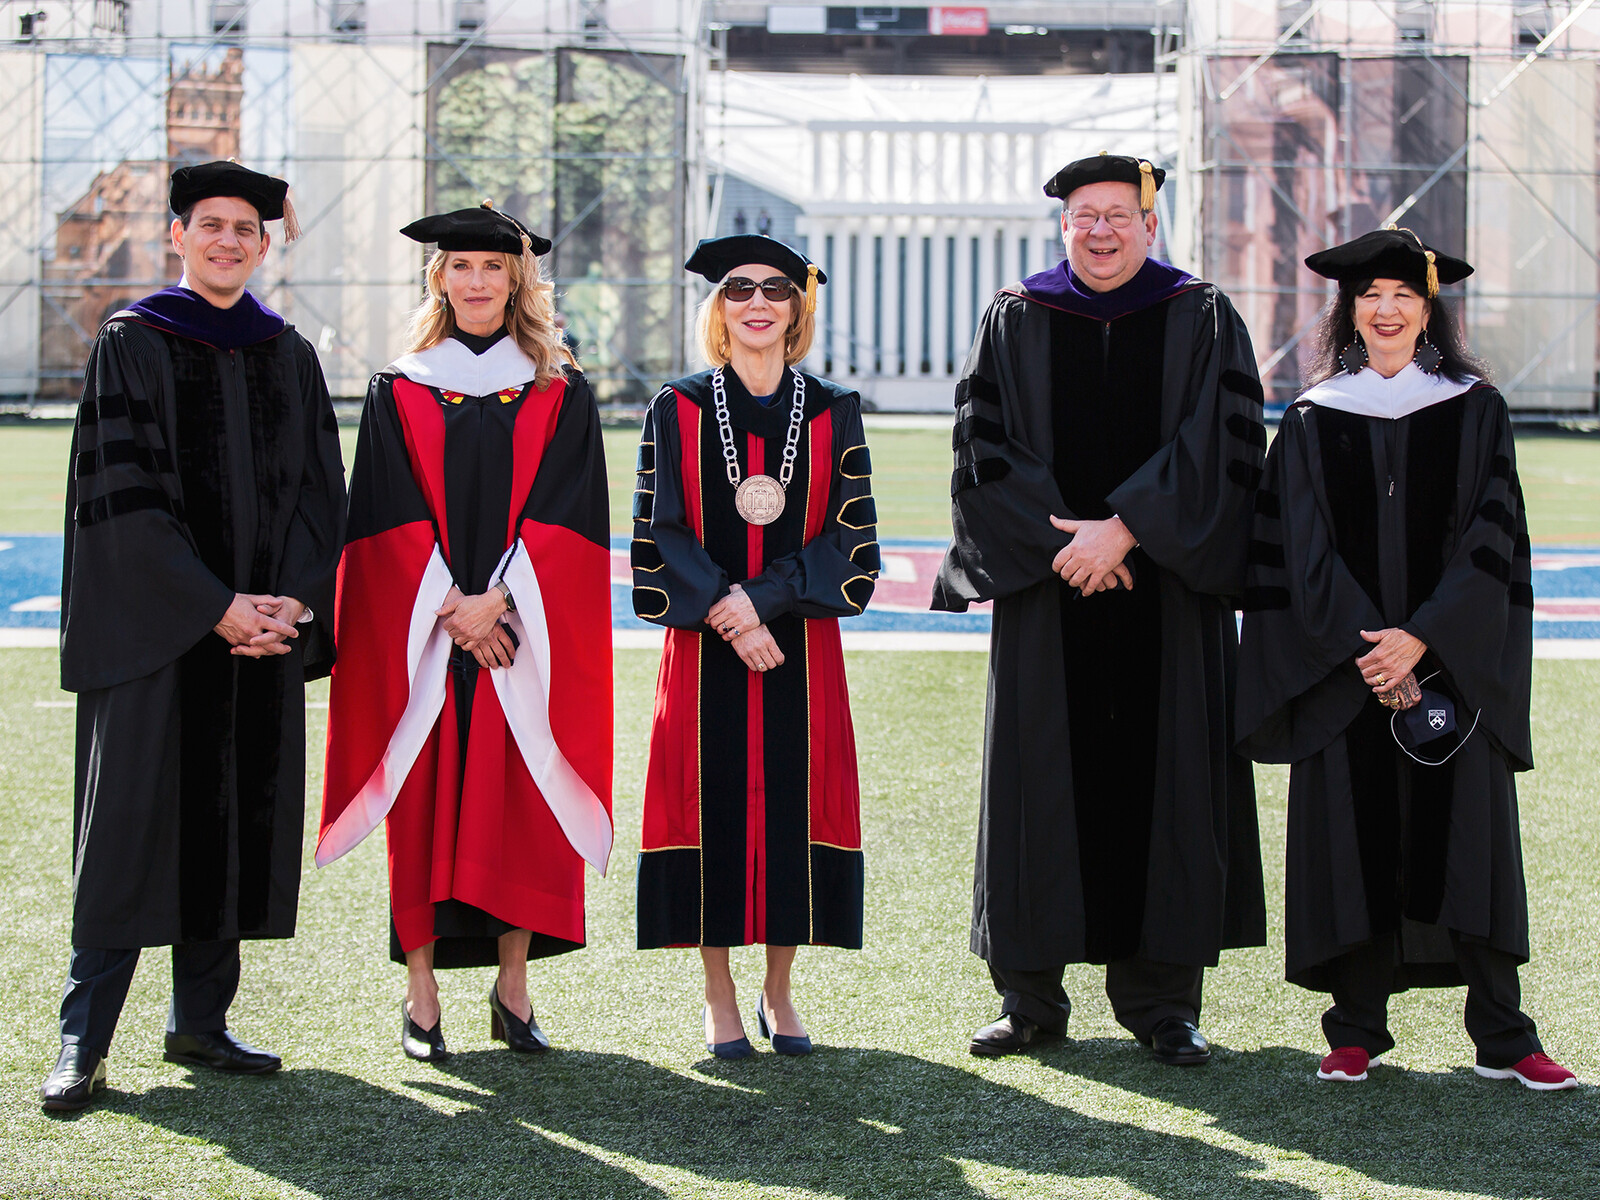 2021 Penn Commencement honorary degree recipients in regalia